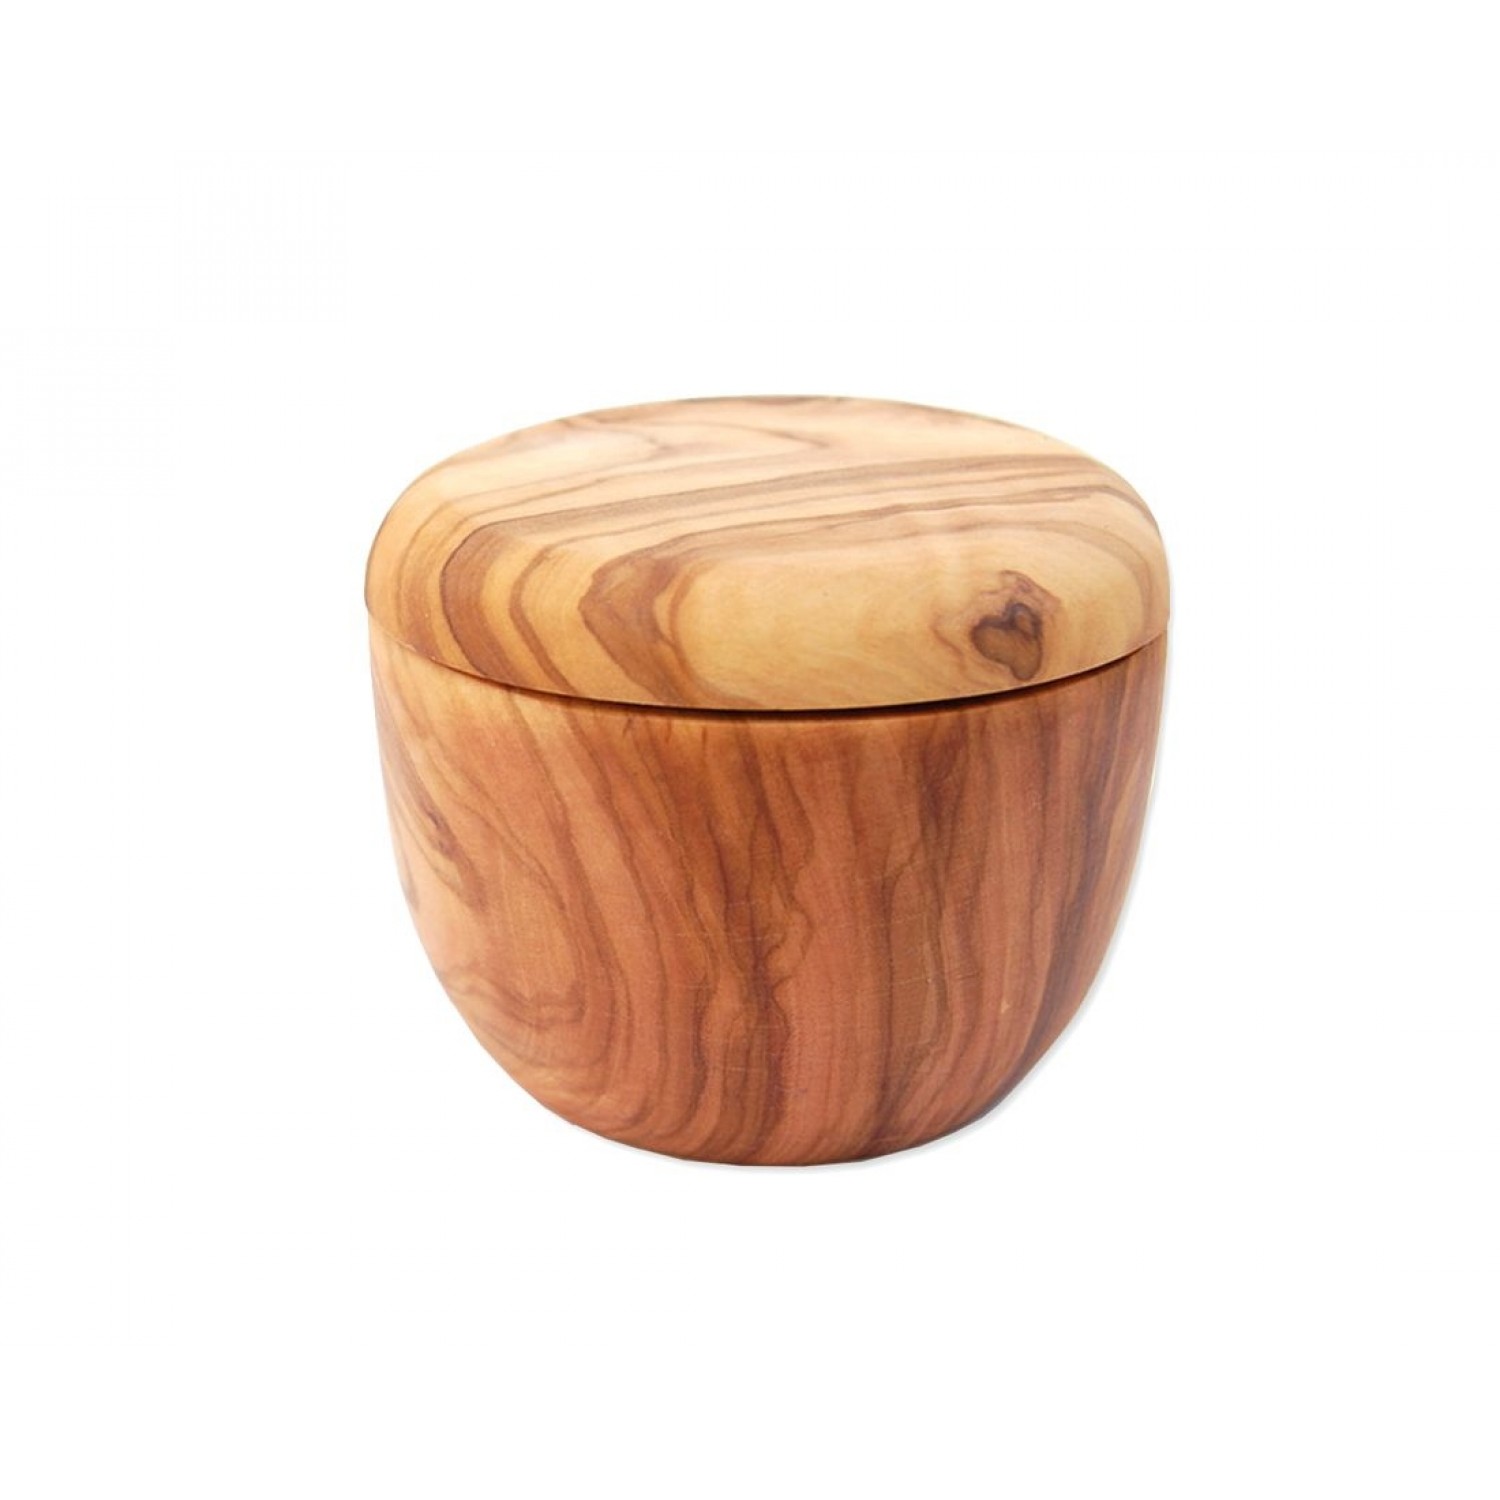 Olive Wood Shaving Dish with Lid for Shaving Soap | D.O.M.